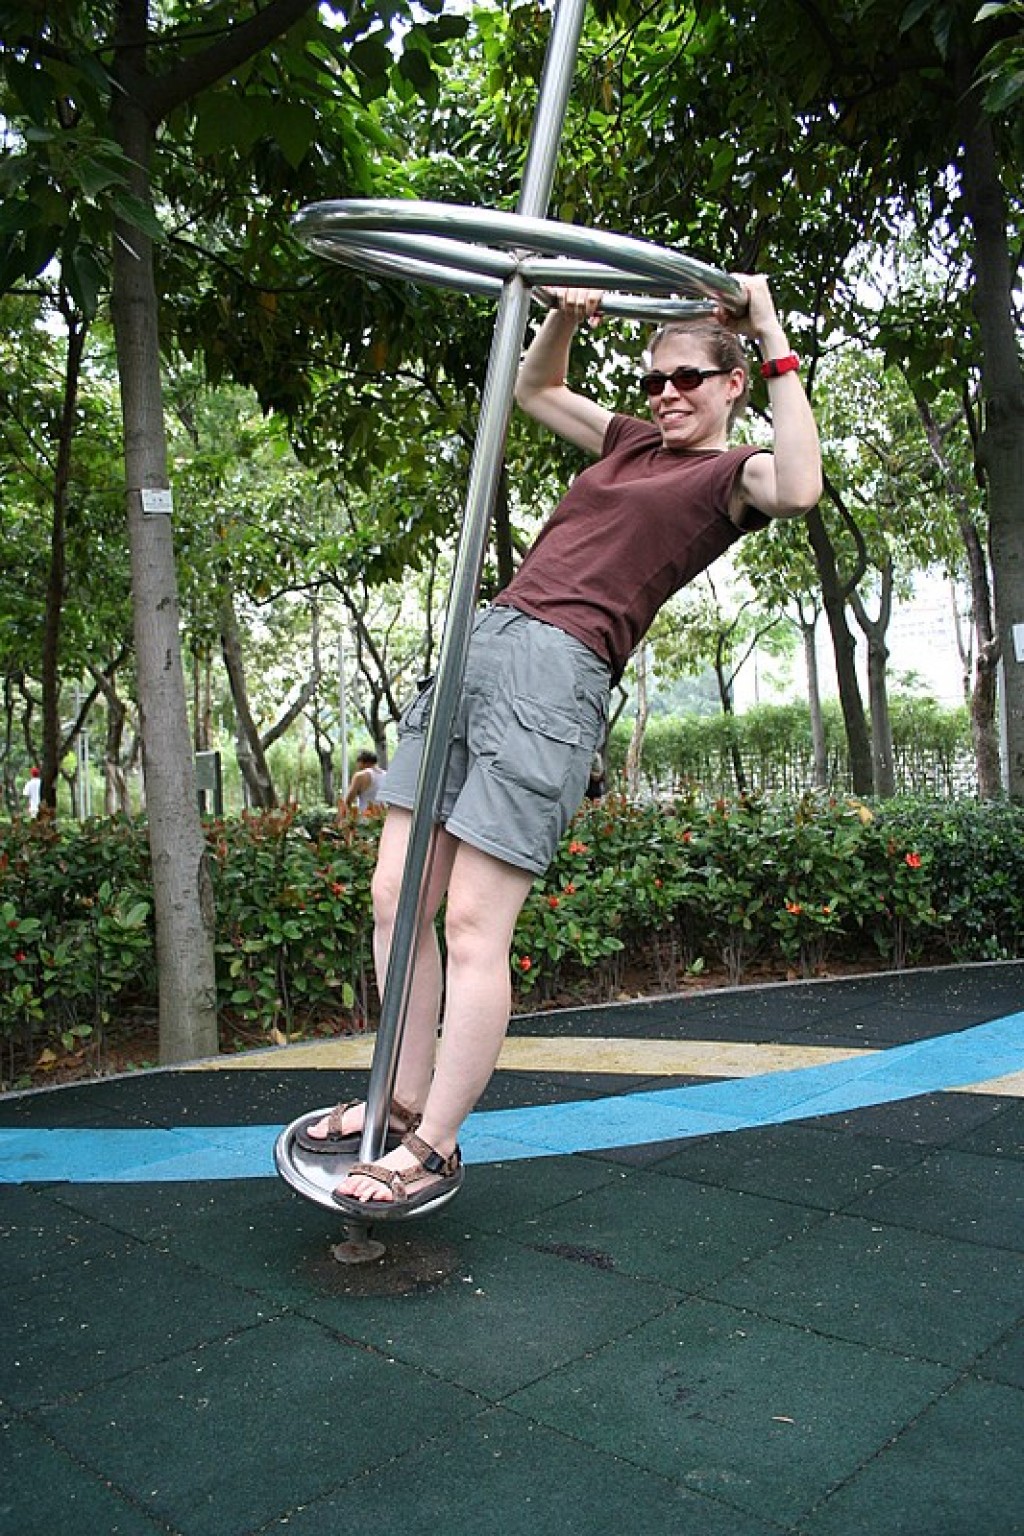 Wendy trying desperately to hold on.  Parks in Hong Kong and also the rest of China have this awesome playground equipment - for ADULTS!  The guy sitting on the bench behind us was trying SO hard not to giggle as we fooled around with all of it.